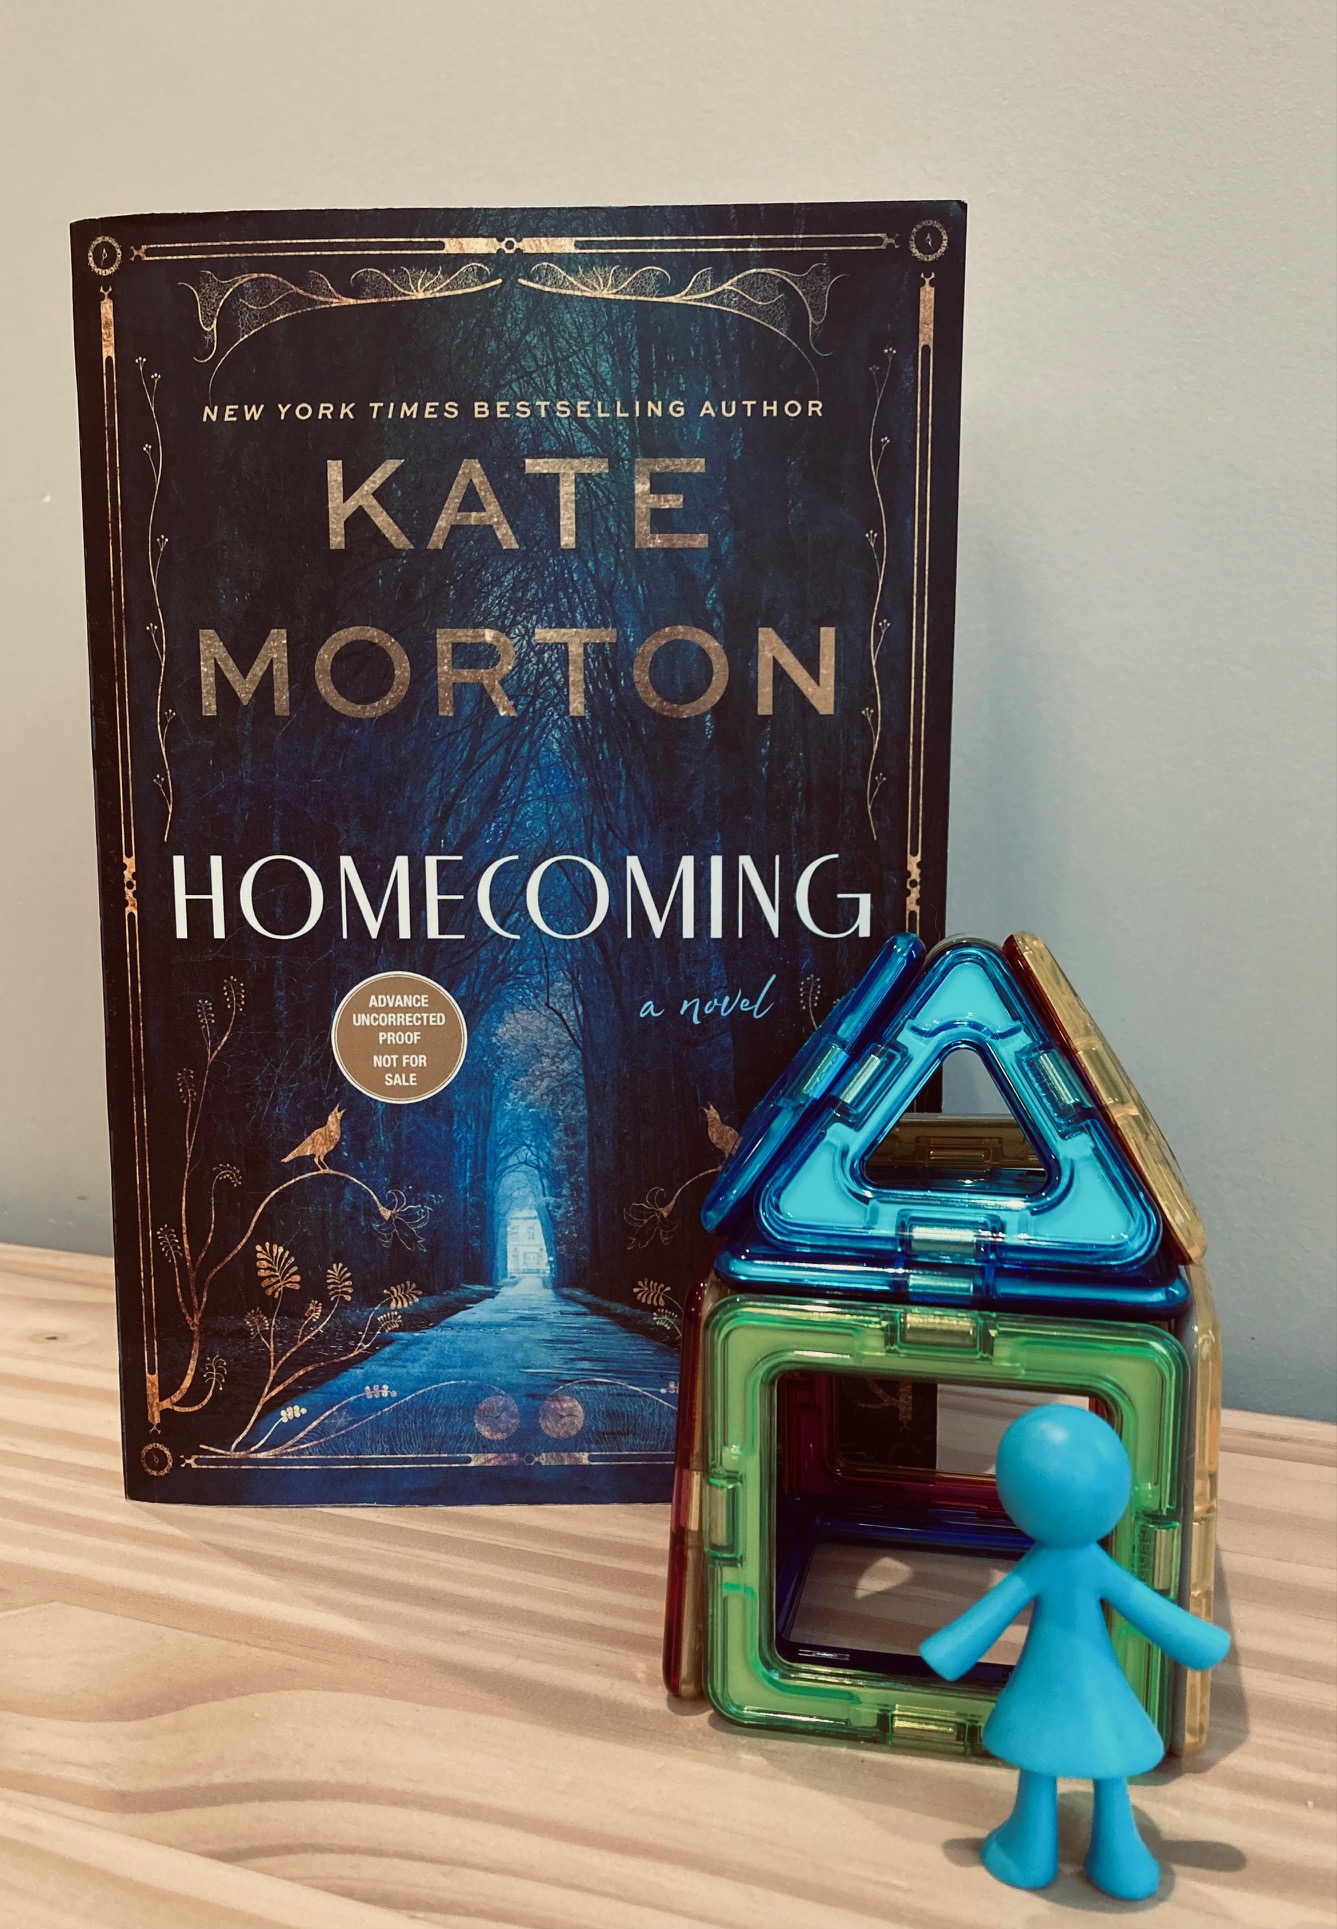 Homecoming by Kate Morton book, standing up beside a small toy house and plastic girl figurine